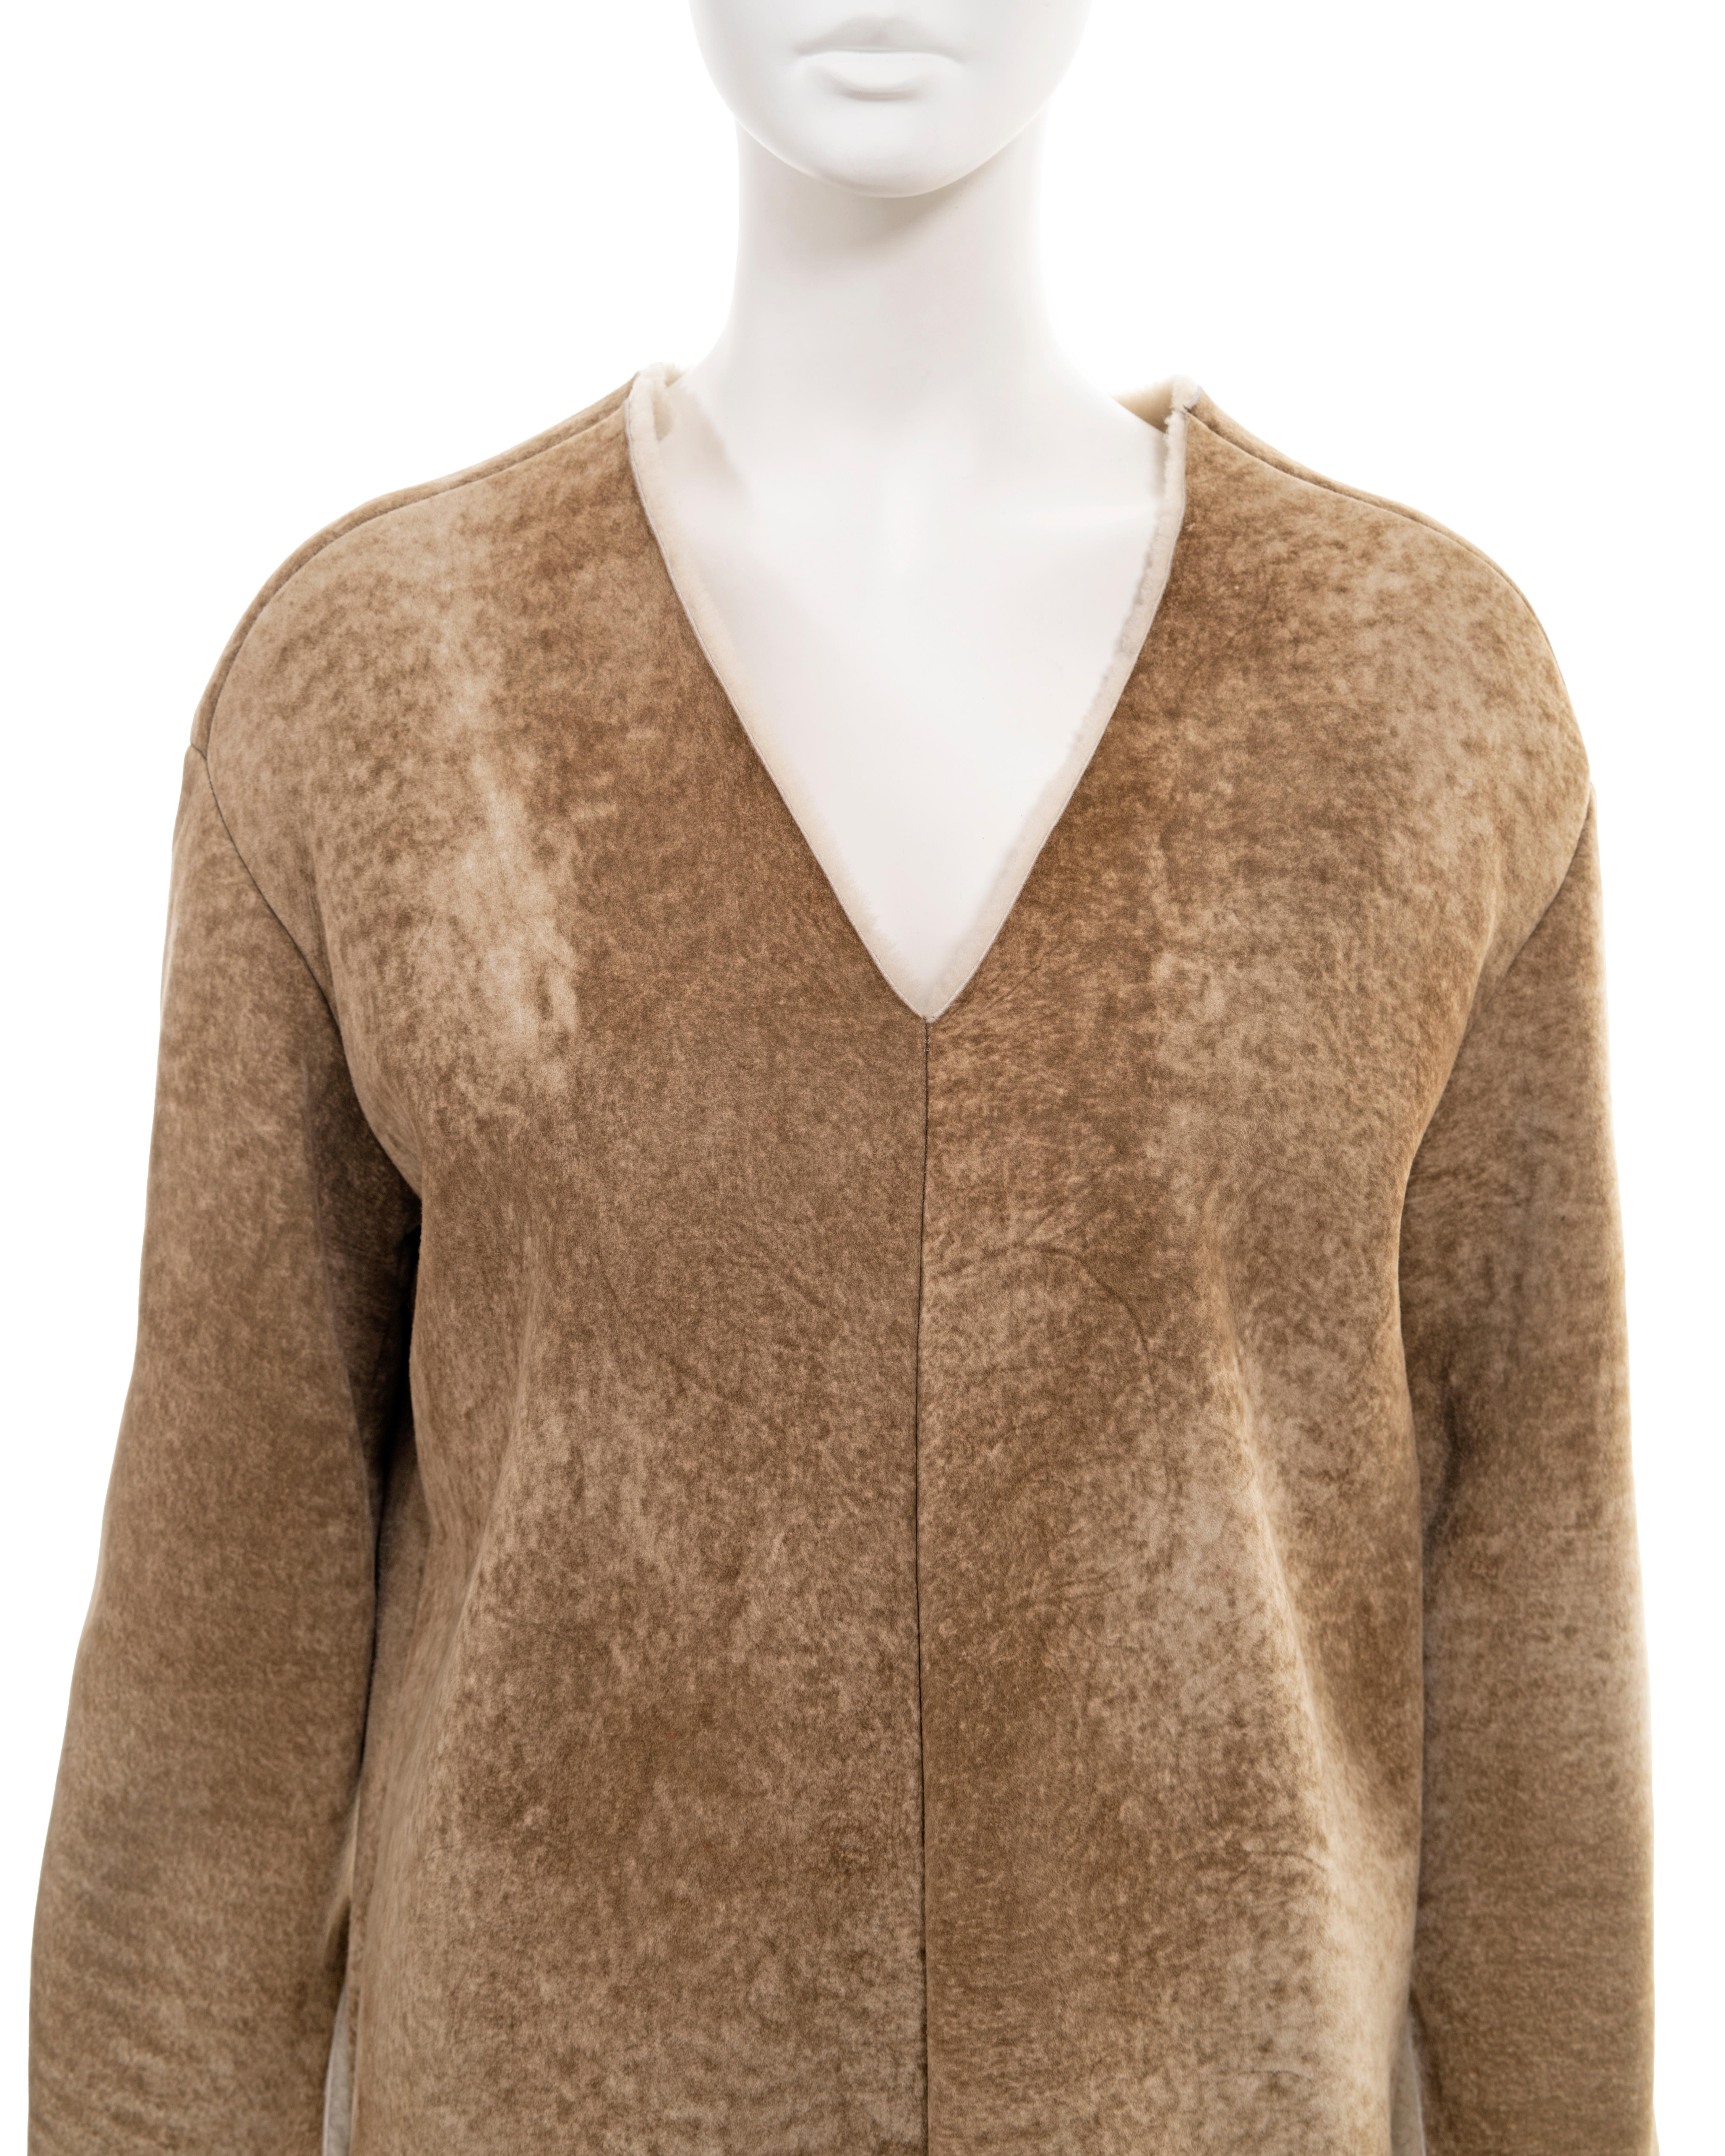 Women's Ruffo Research by A.F. Vandevorst shearling pullover sweater, fw 2000 For Sale